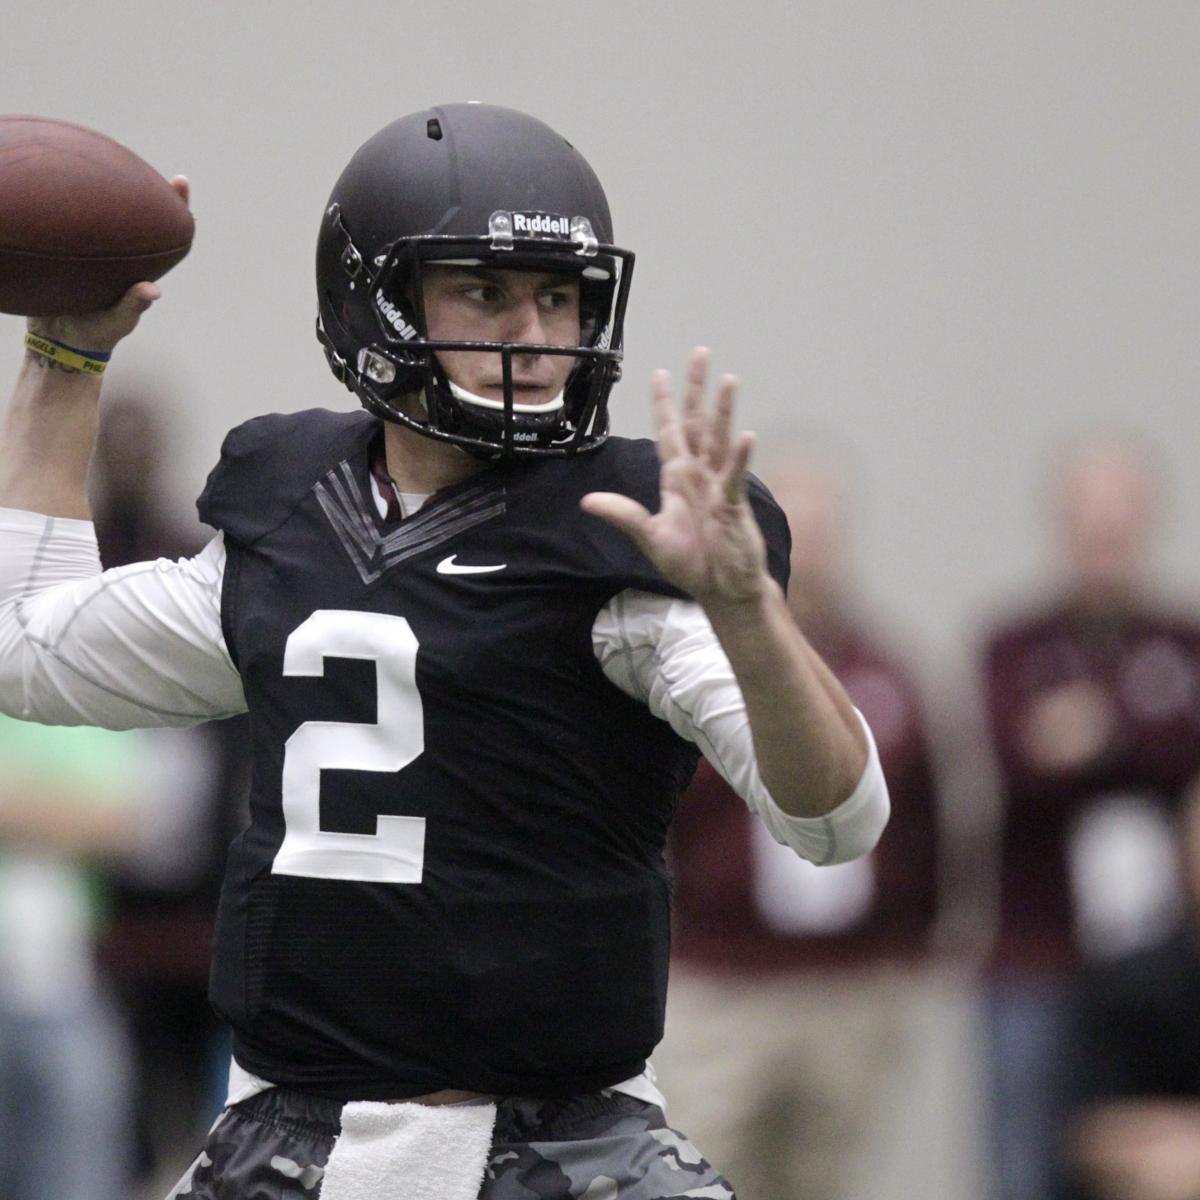 Johnny Manziel's Pro Day Solidifies Him as 2014 NFL Draft's Top